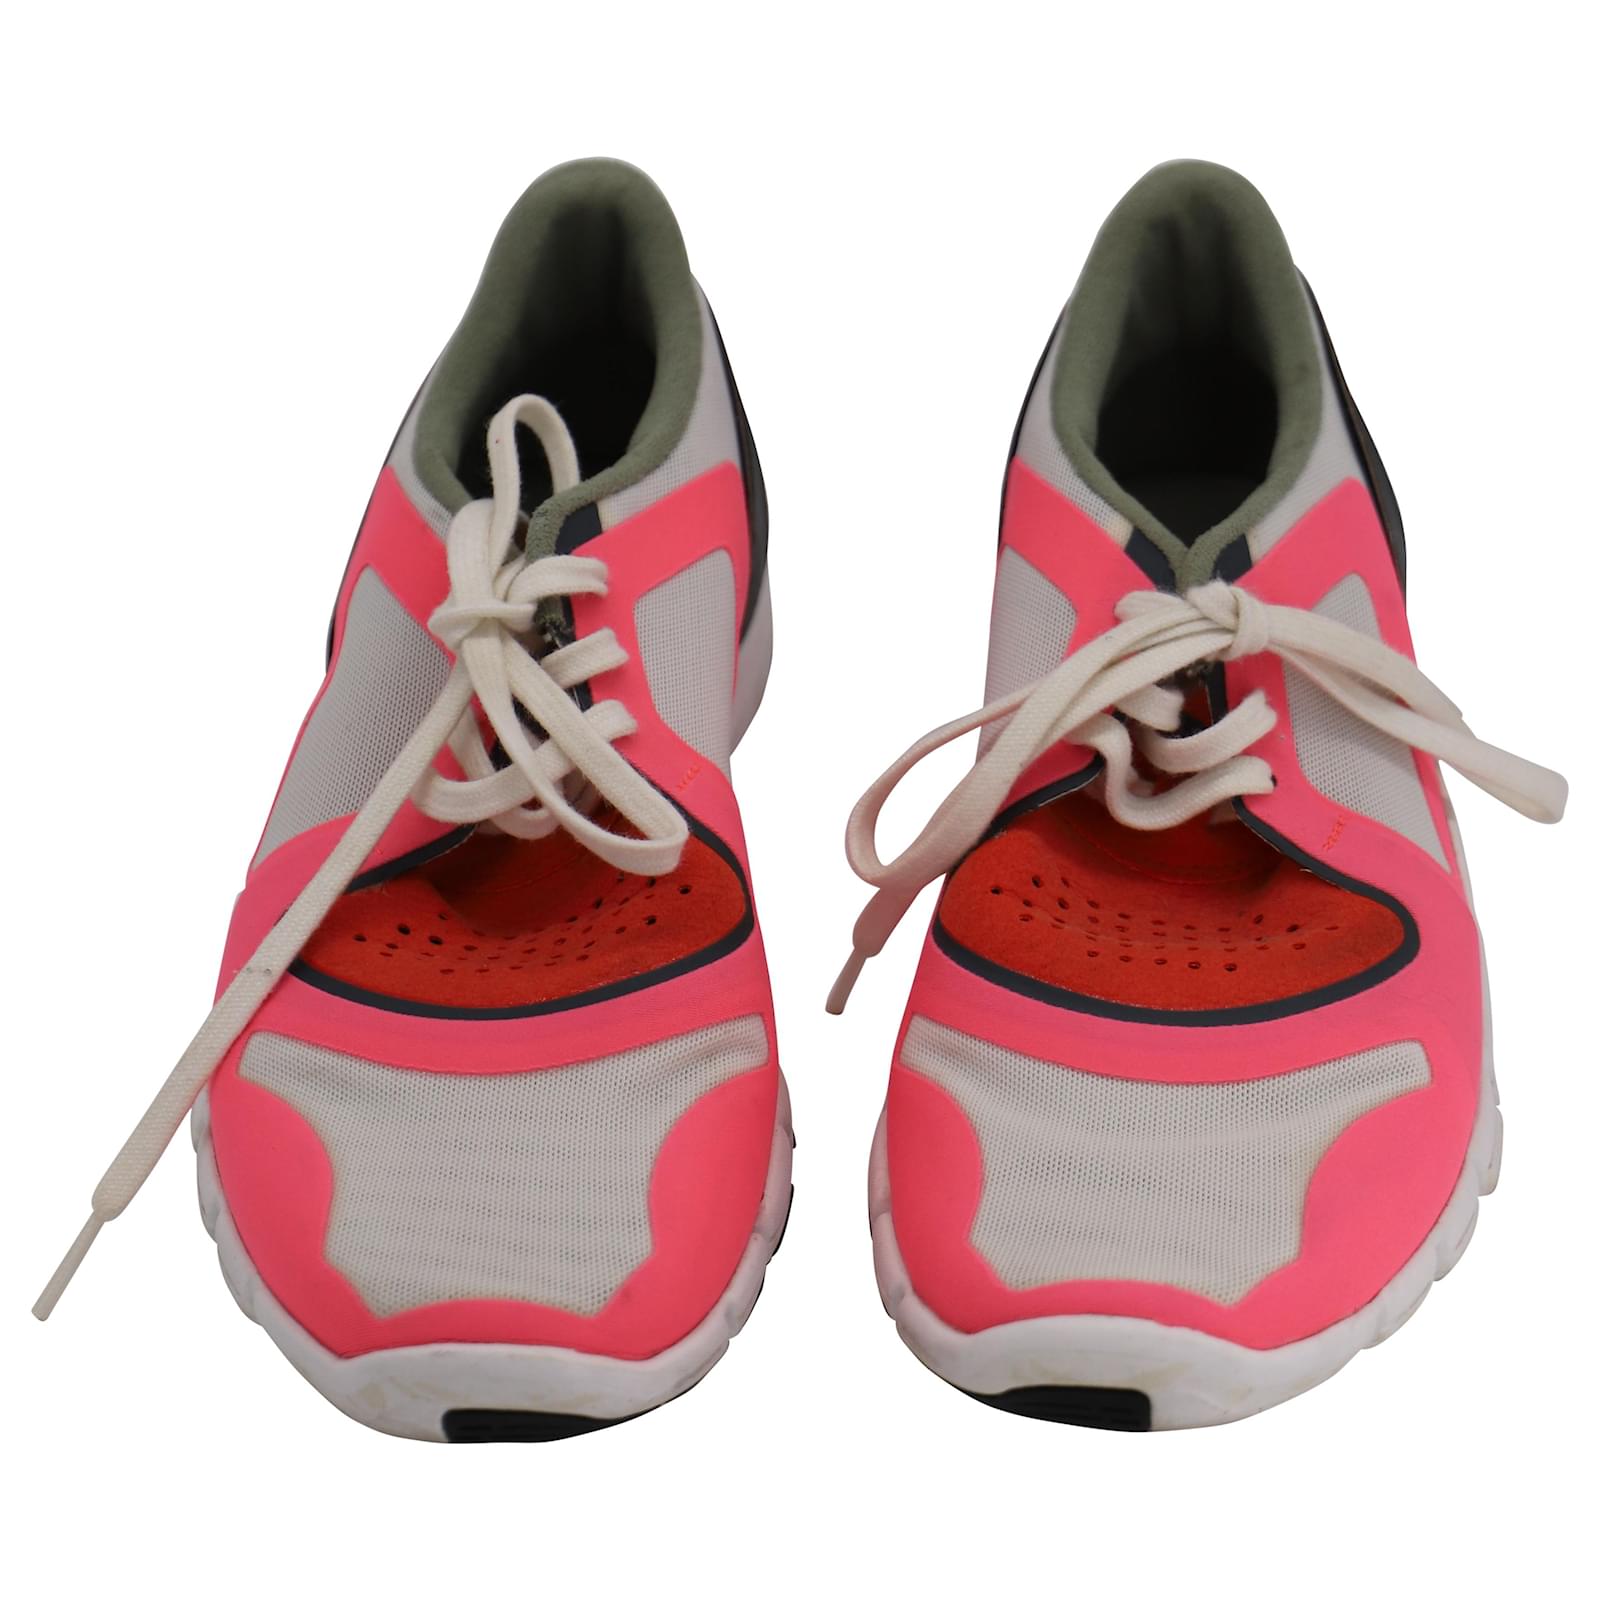 Stella Mc Cartney by Stella McCartney Alayta Sneakers in Multicolor Faux Multiple colors Synthetic ref.466245 - Closet